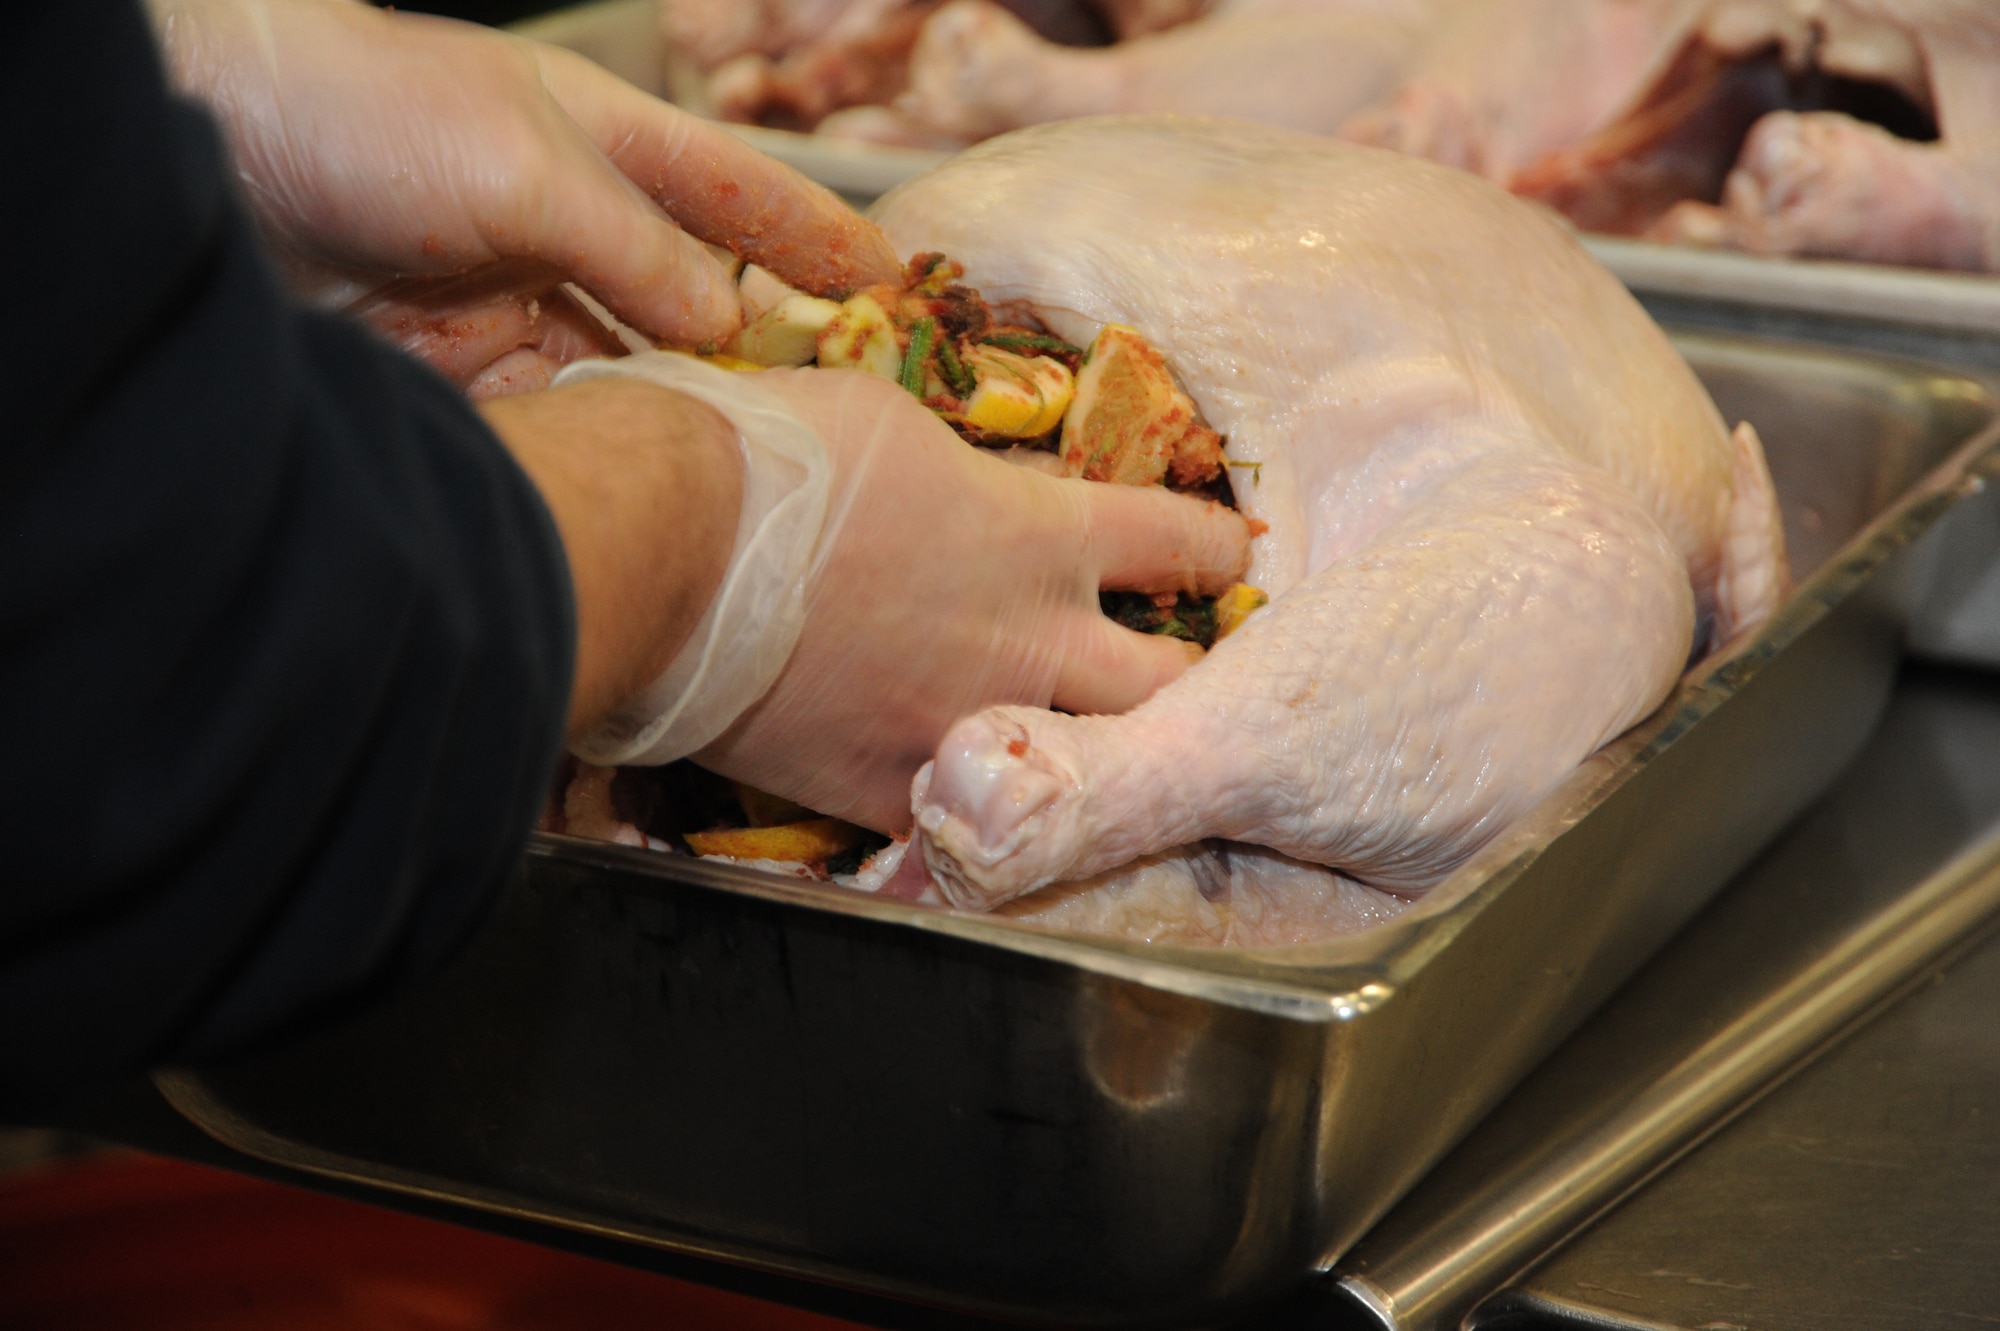 SPANGDAHLEM AIR BASE, Germany-- Dennis Tautges, a chef for the 52nd Force Support Squadron, stuffs a turkey in preparation for a Thanksgiving day meal Nov. 28, 2013, at the Mosel Hall Dining Facility.  The turkey, along with other main courses, served for more than 150 Airmen and their families. (U.S. Air Force photo by Airman 1st Class Dylan Nuckolls/Released)